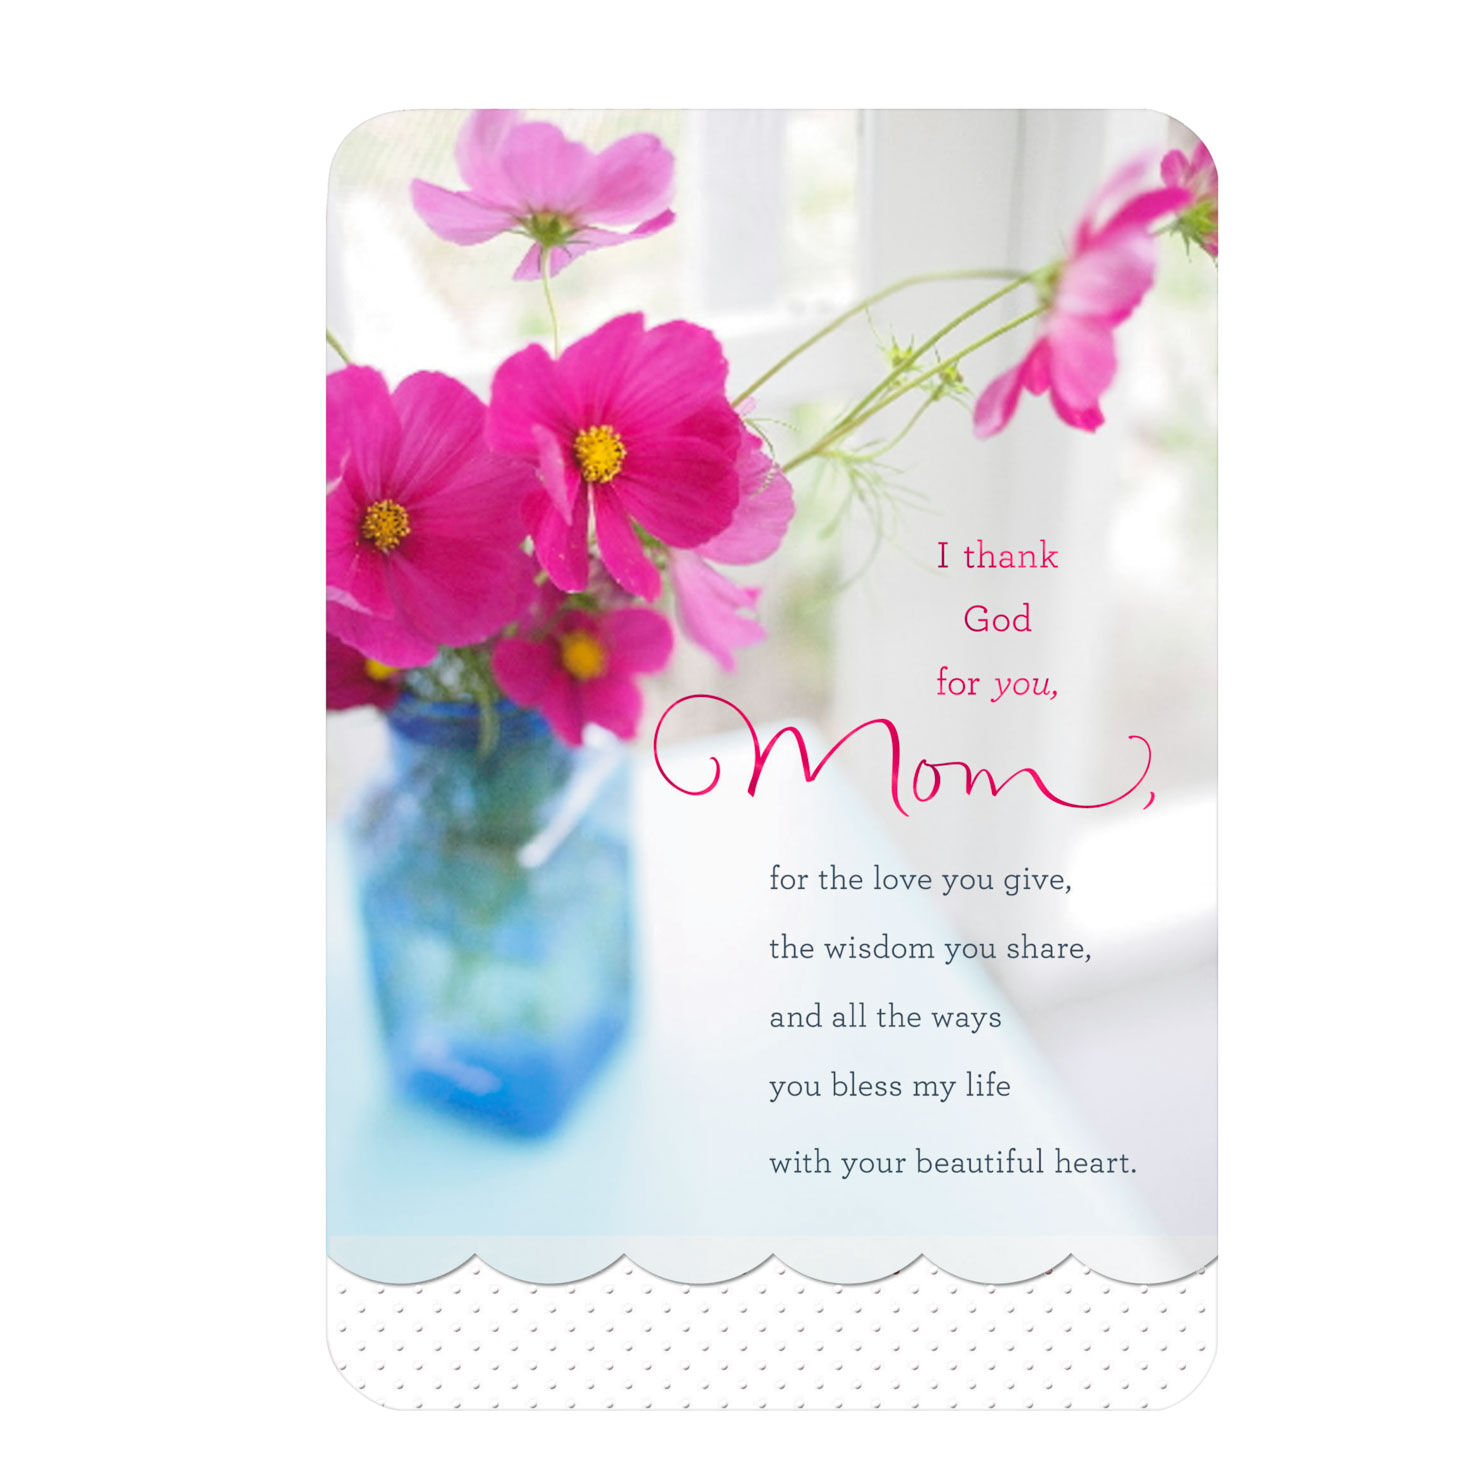 My Lovely Wife Heart Flowers /& Gifts Design Large Christmas Card Lovely Verse